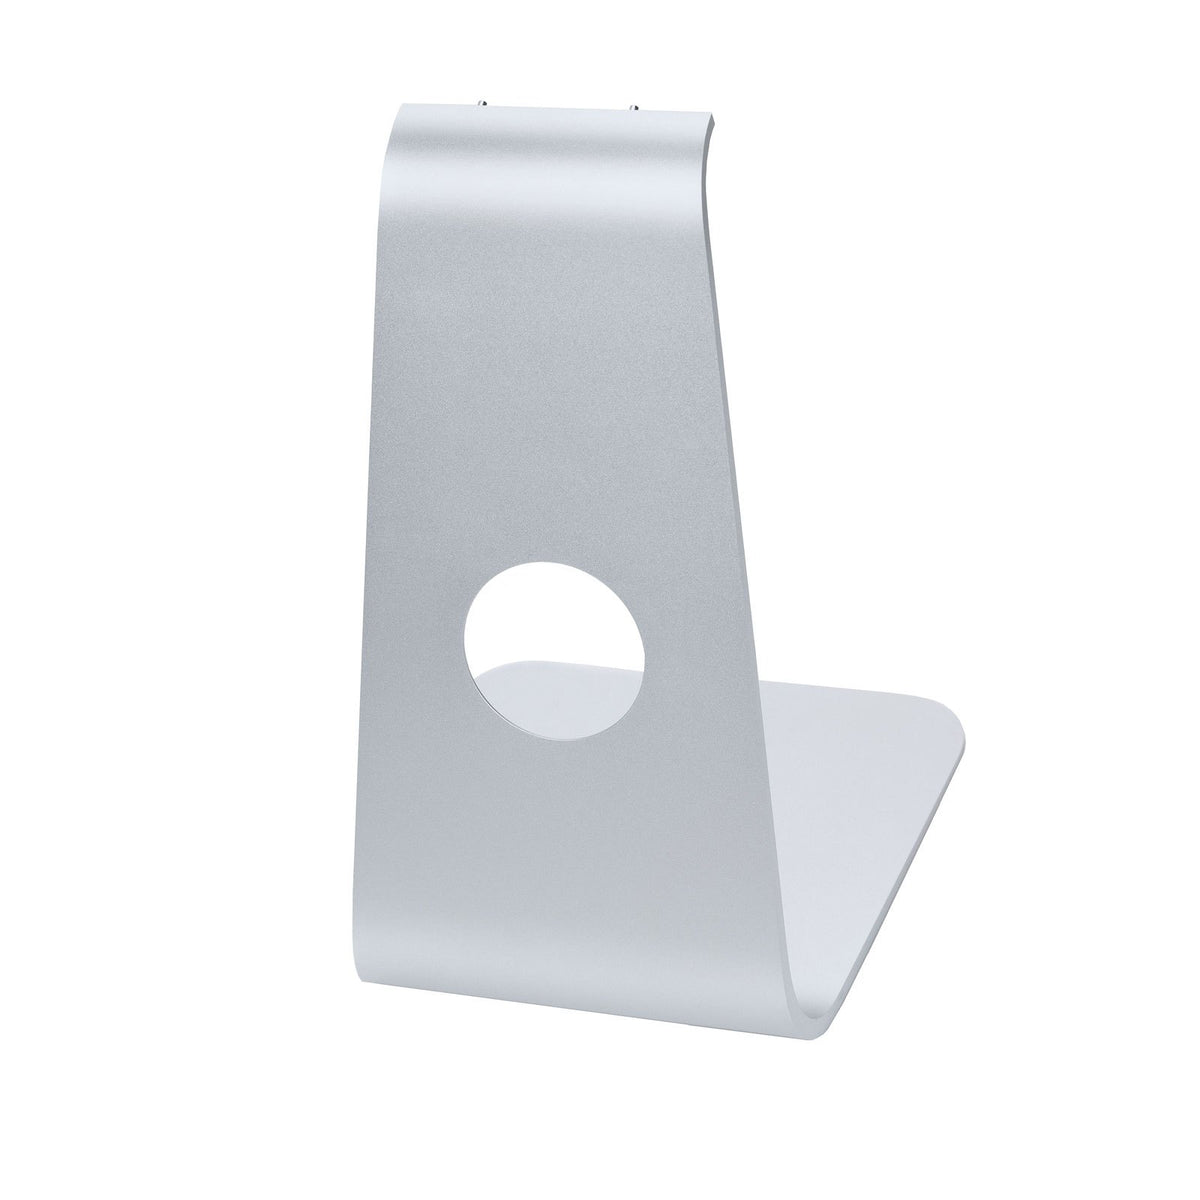 LEG STAND FOR IMAC 21.5" A1418 (LATE 2013)